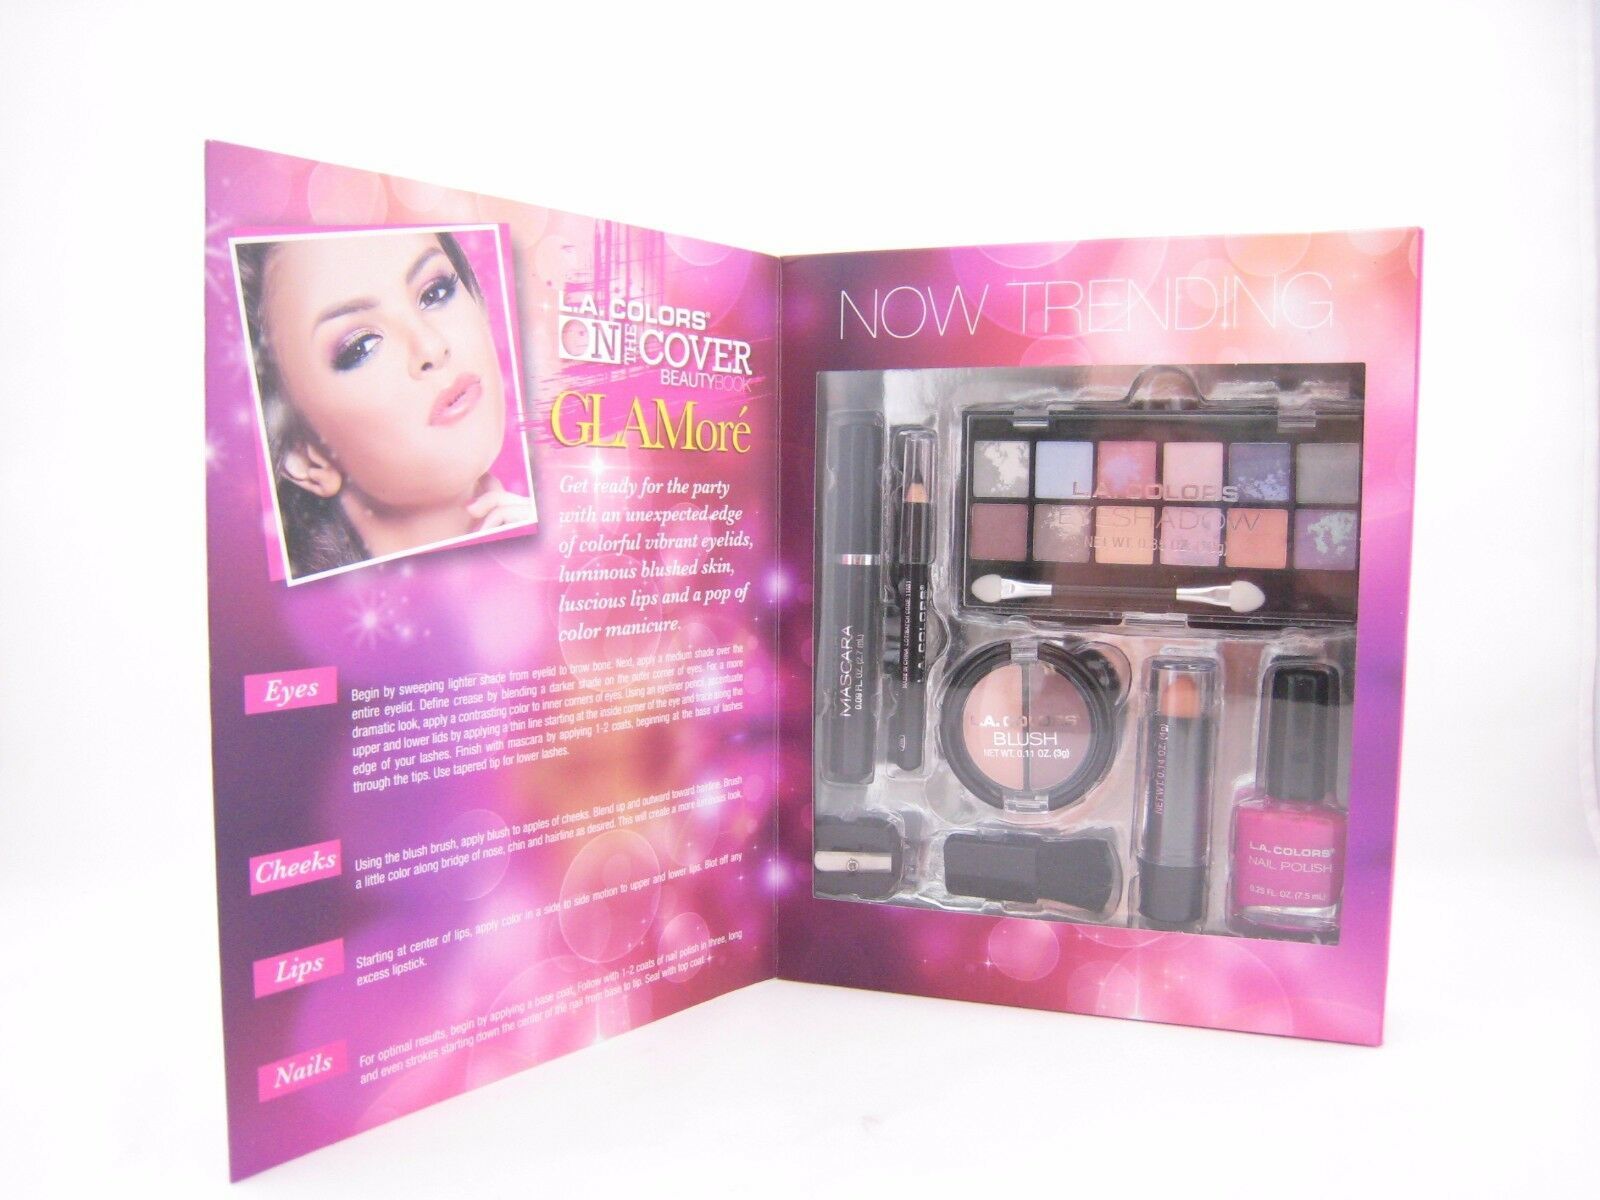 L.A. Colors On The Cover Beauty Book Glamor'e 20 Piece Set - $12.75